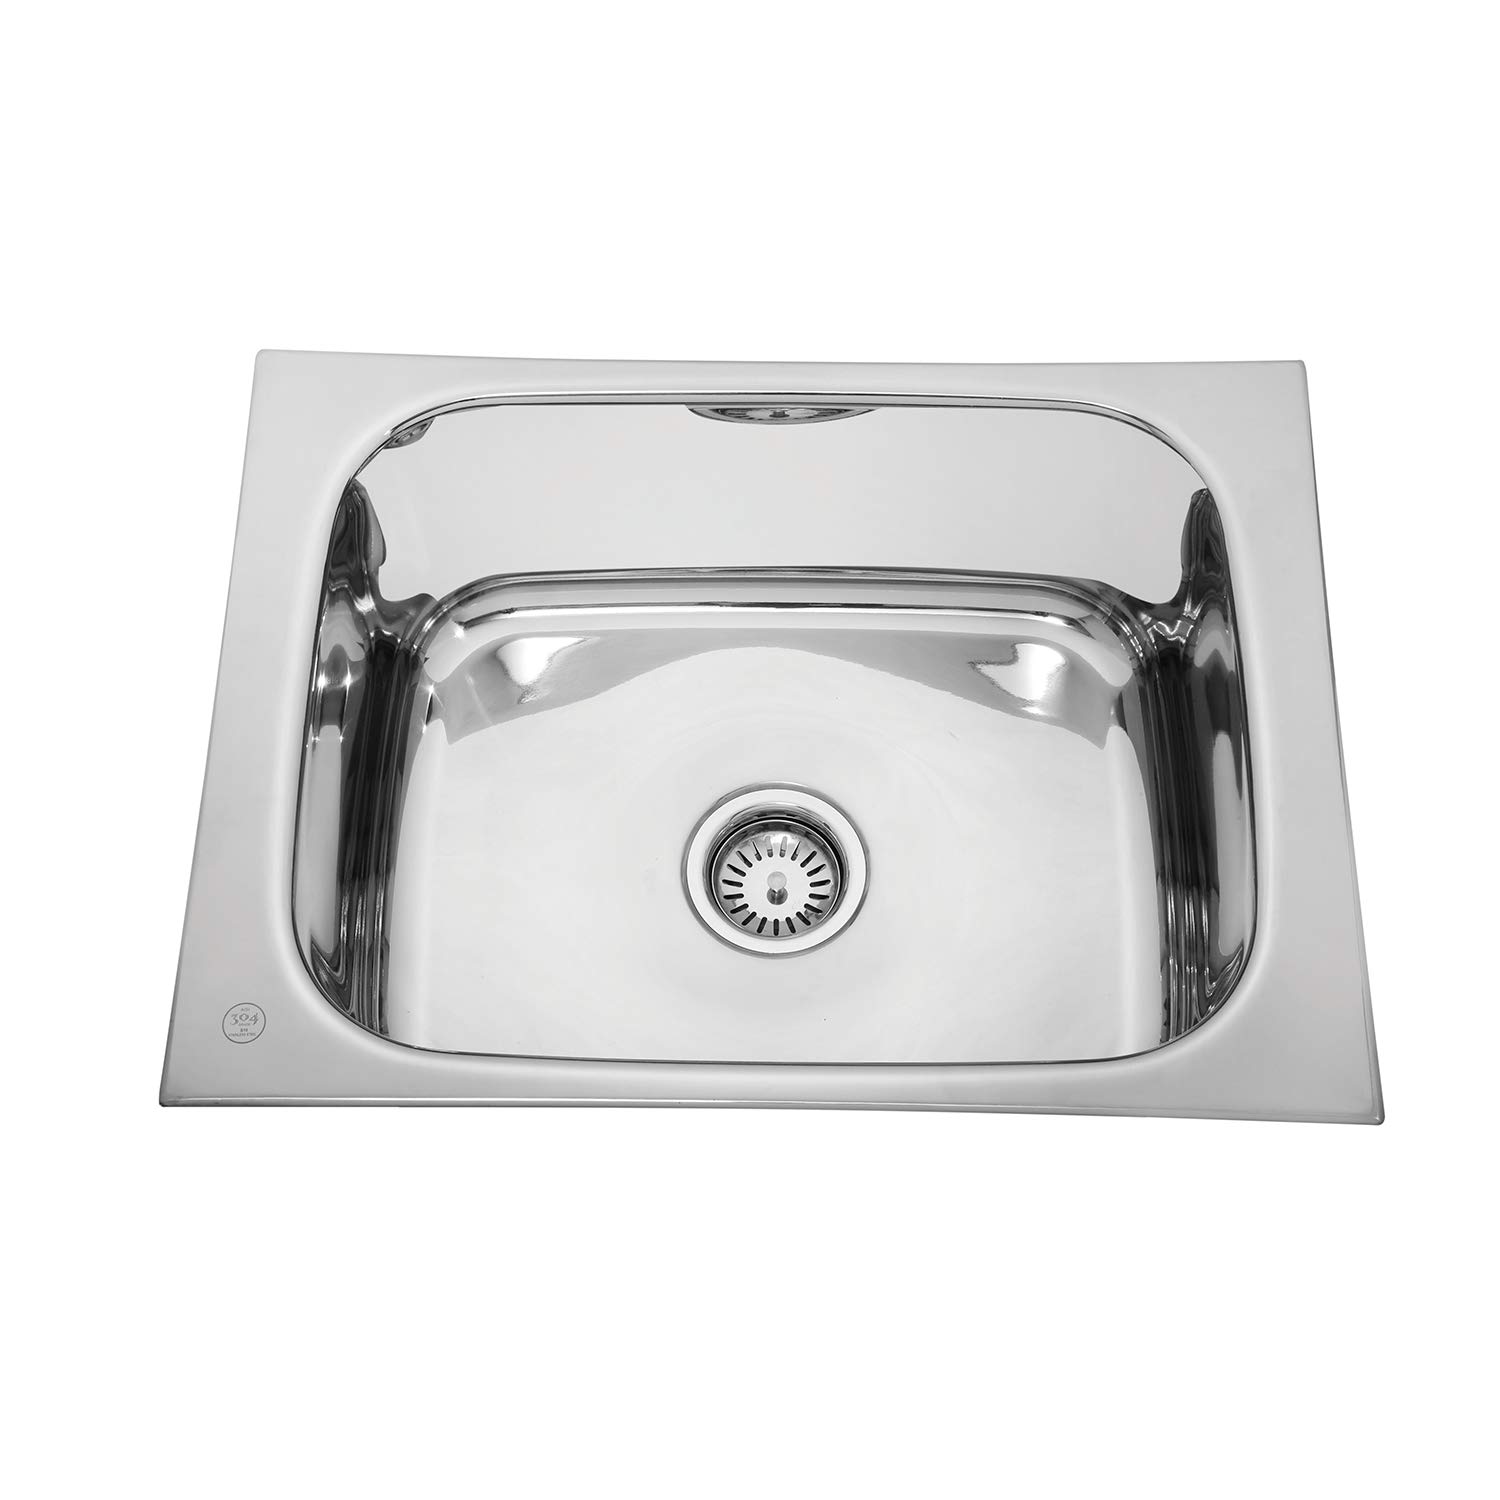 Parryware C857281 Eco Series (New) Folded Edge- Gloss Finish Single Bowl Kitchen Sink